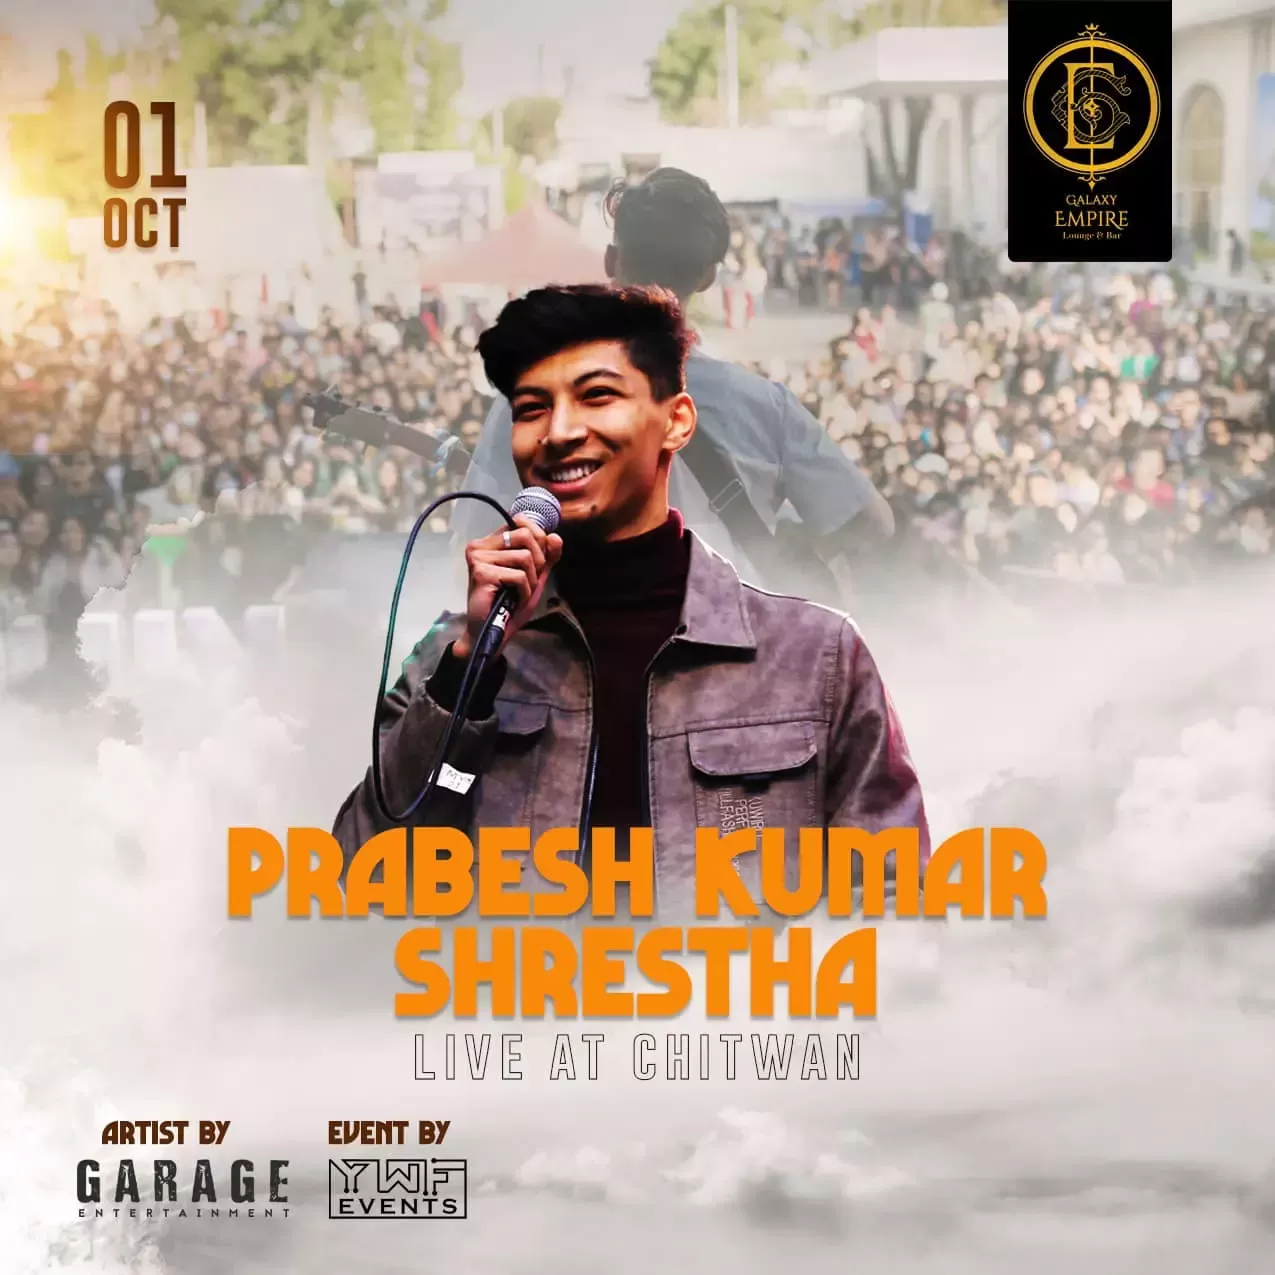 Prabesh Kumar Shrestha Live on Stage For the First Time In Chitwan At The Galaxy Empire - Dashain Celebration